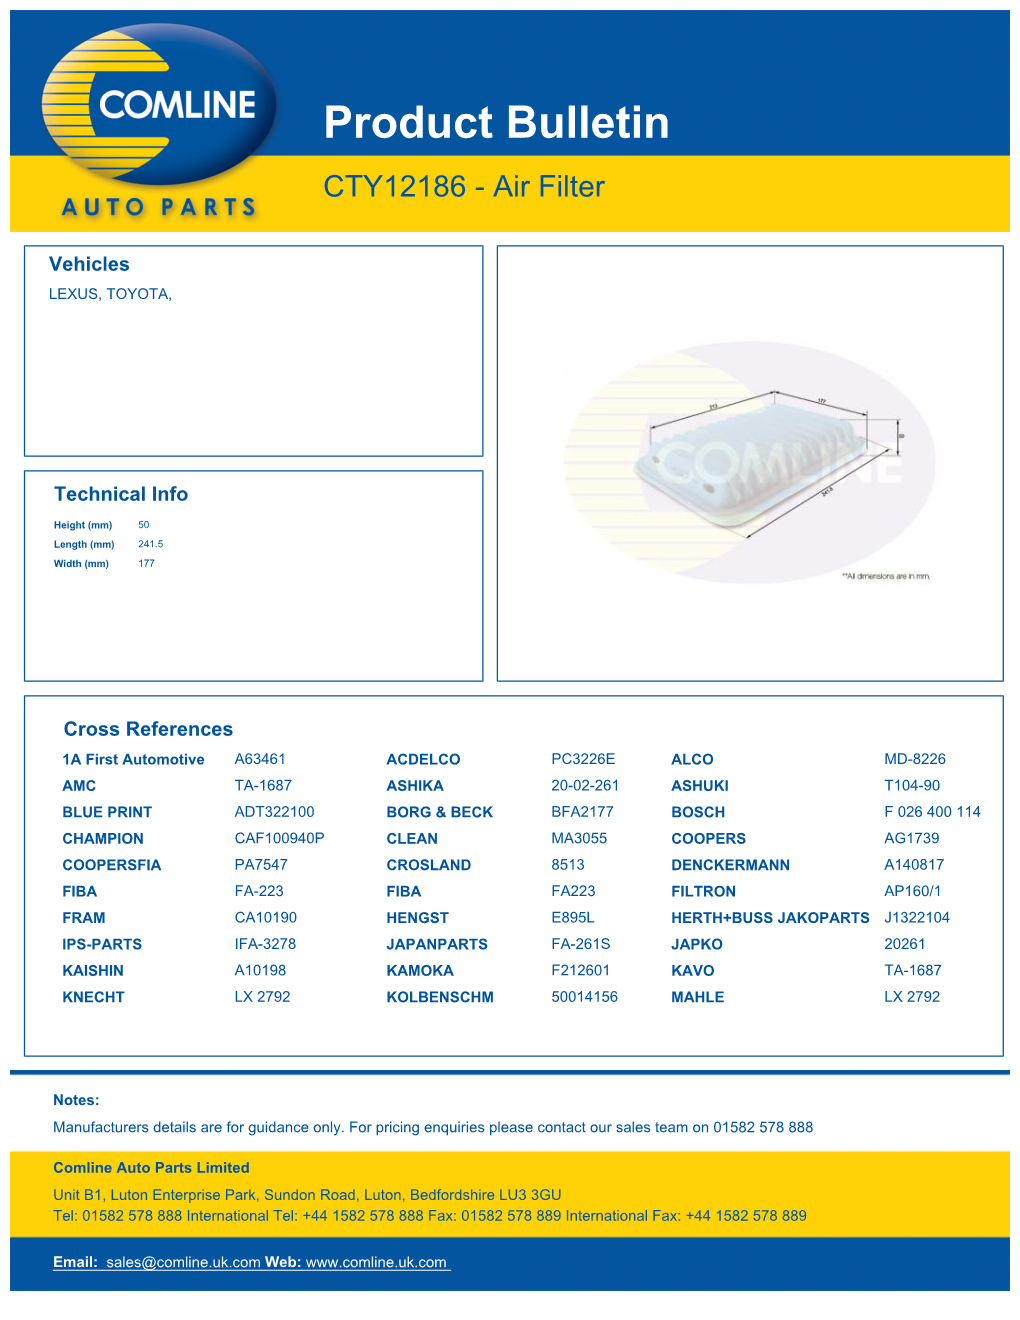 Product Bulletin CTY12186 - Air Filter